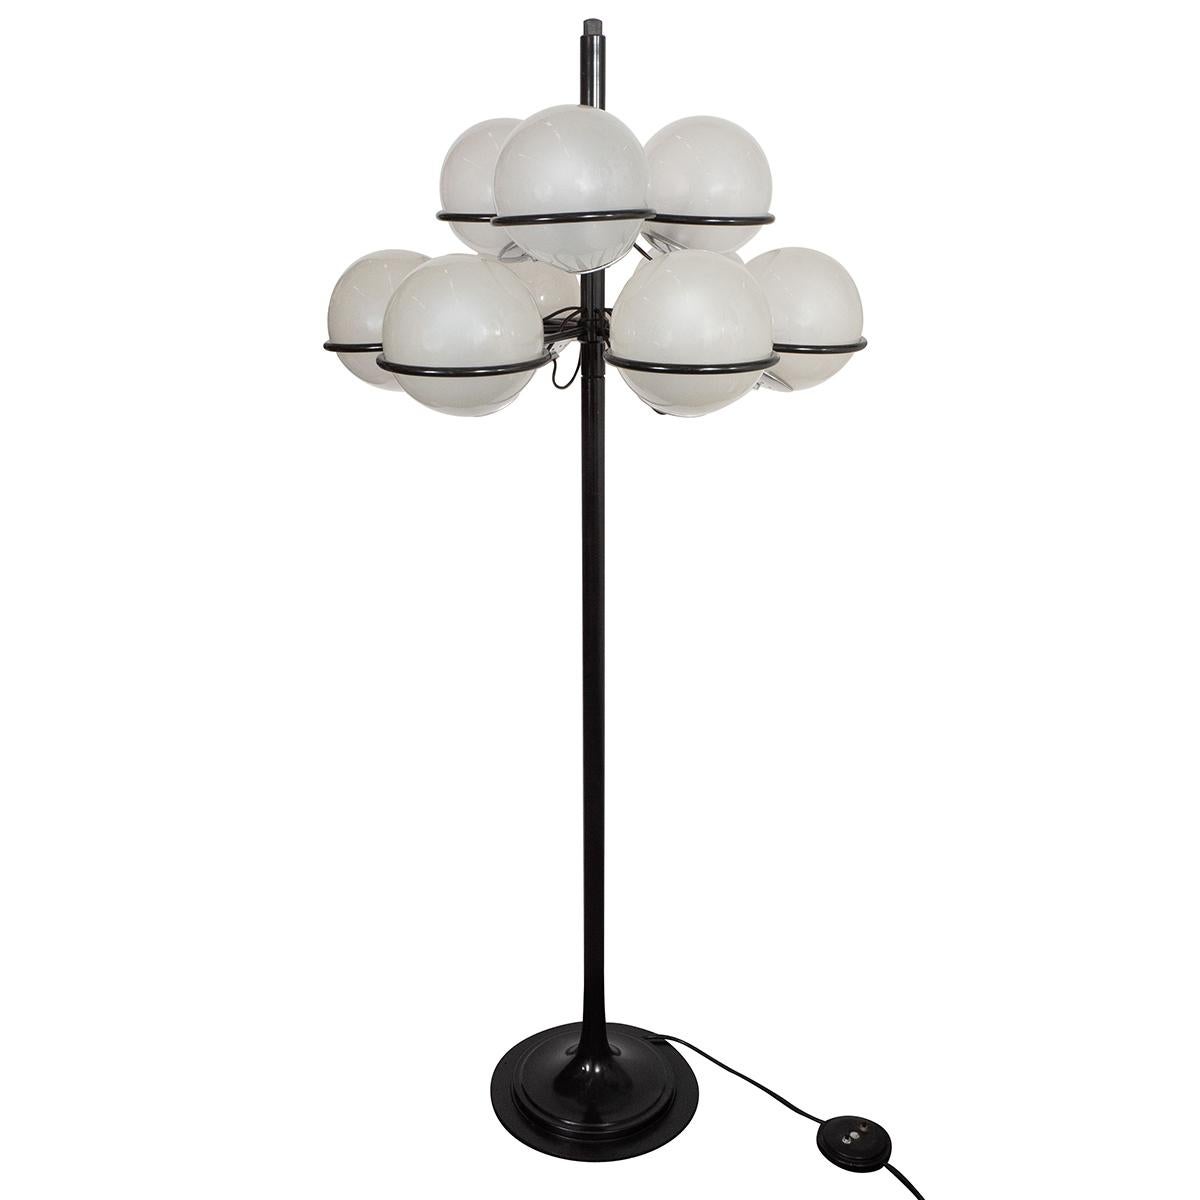 
Floor lamp model 1904 by Gino Sarfatti for Arteluce, Brescia, Italy circa 1966
This floor lamp features nine lights surrounded by frosted Murano glass globes. 
Italian, 1912–1985. Original switch included to allow various lighting arrangements.